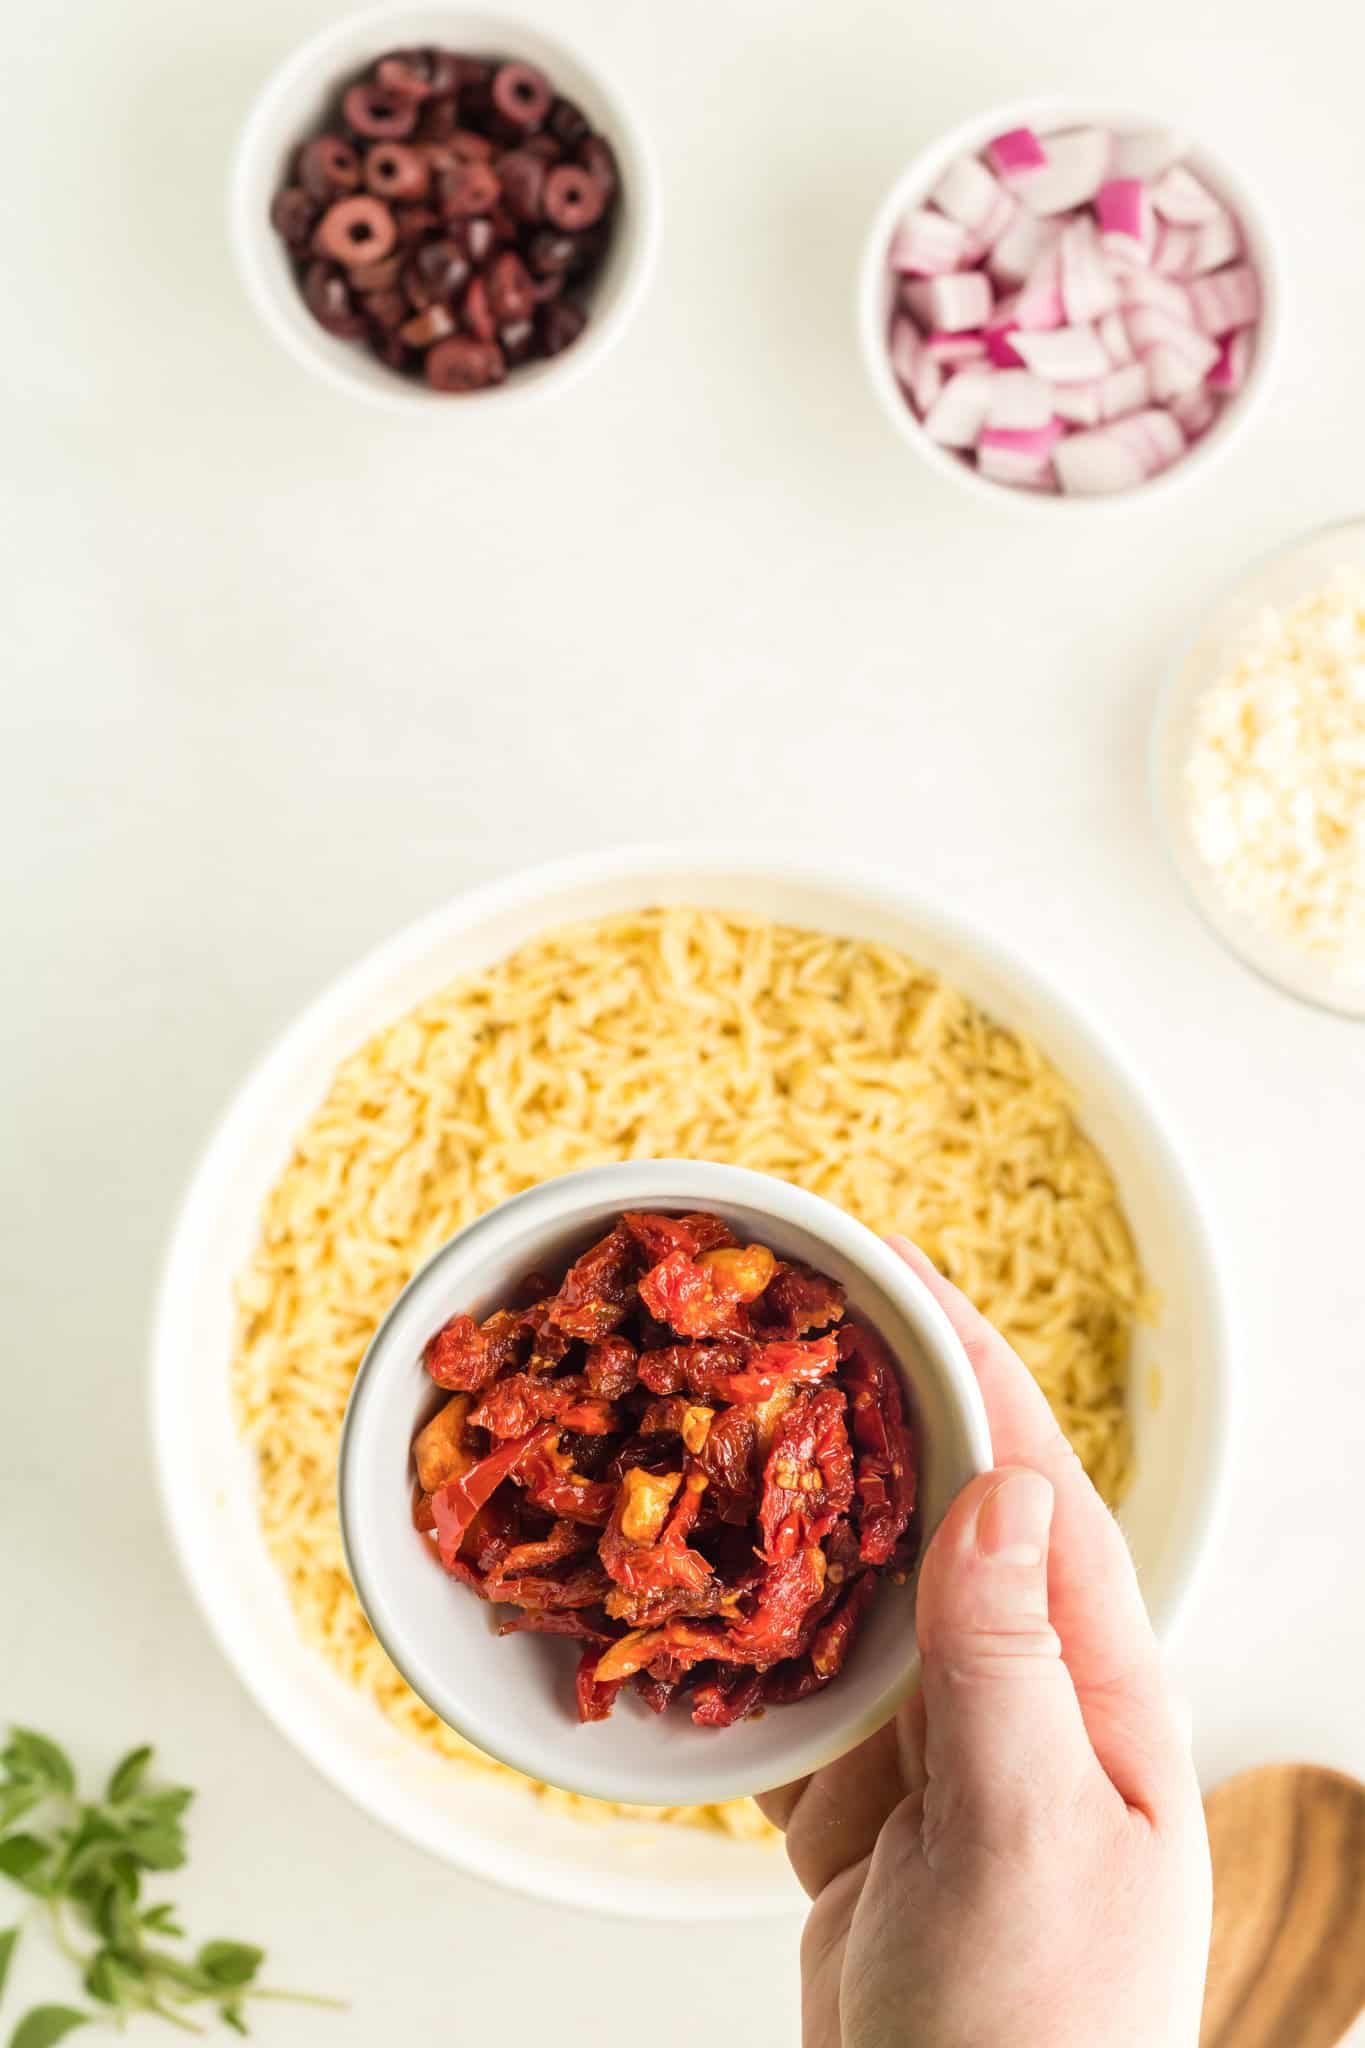 sun dried tomatoes being added to orzo pasta in a bowl